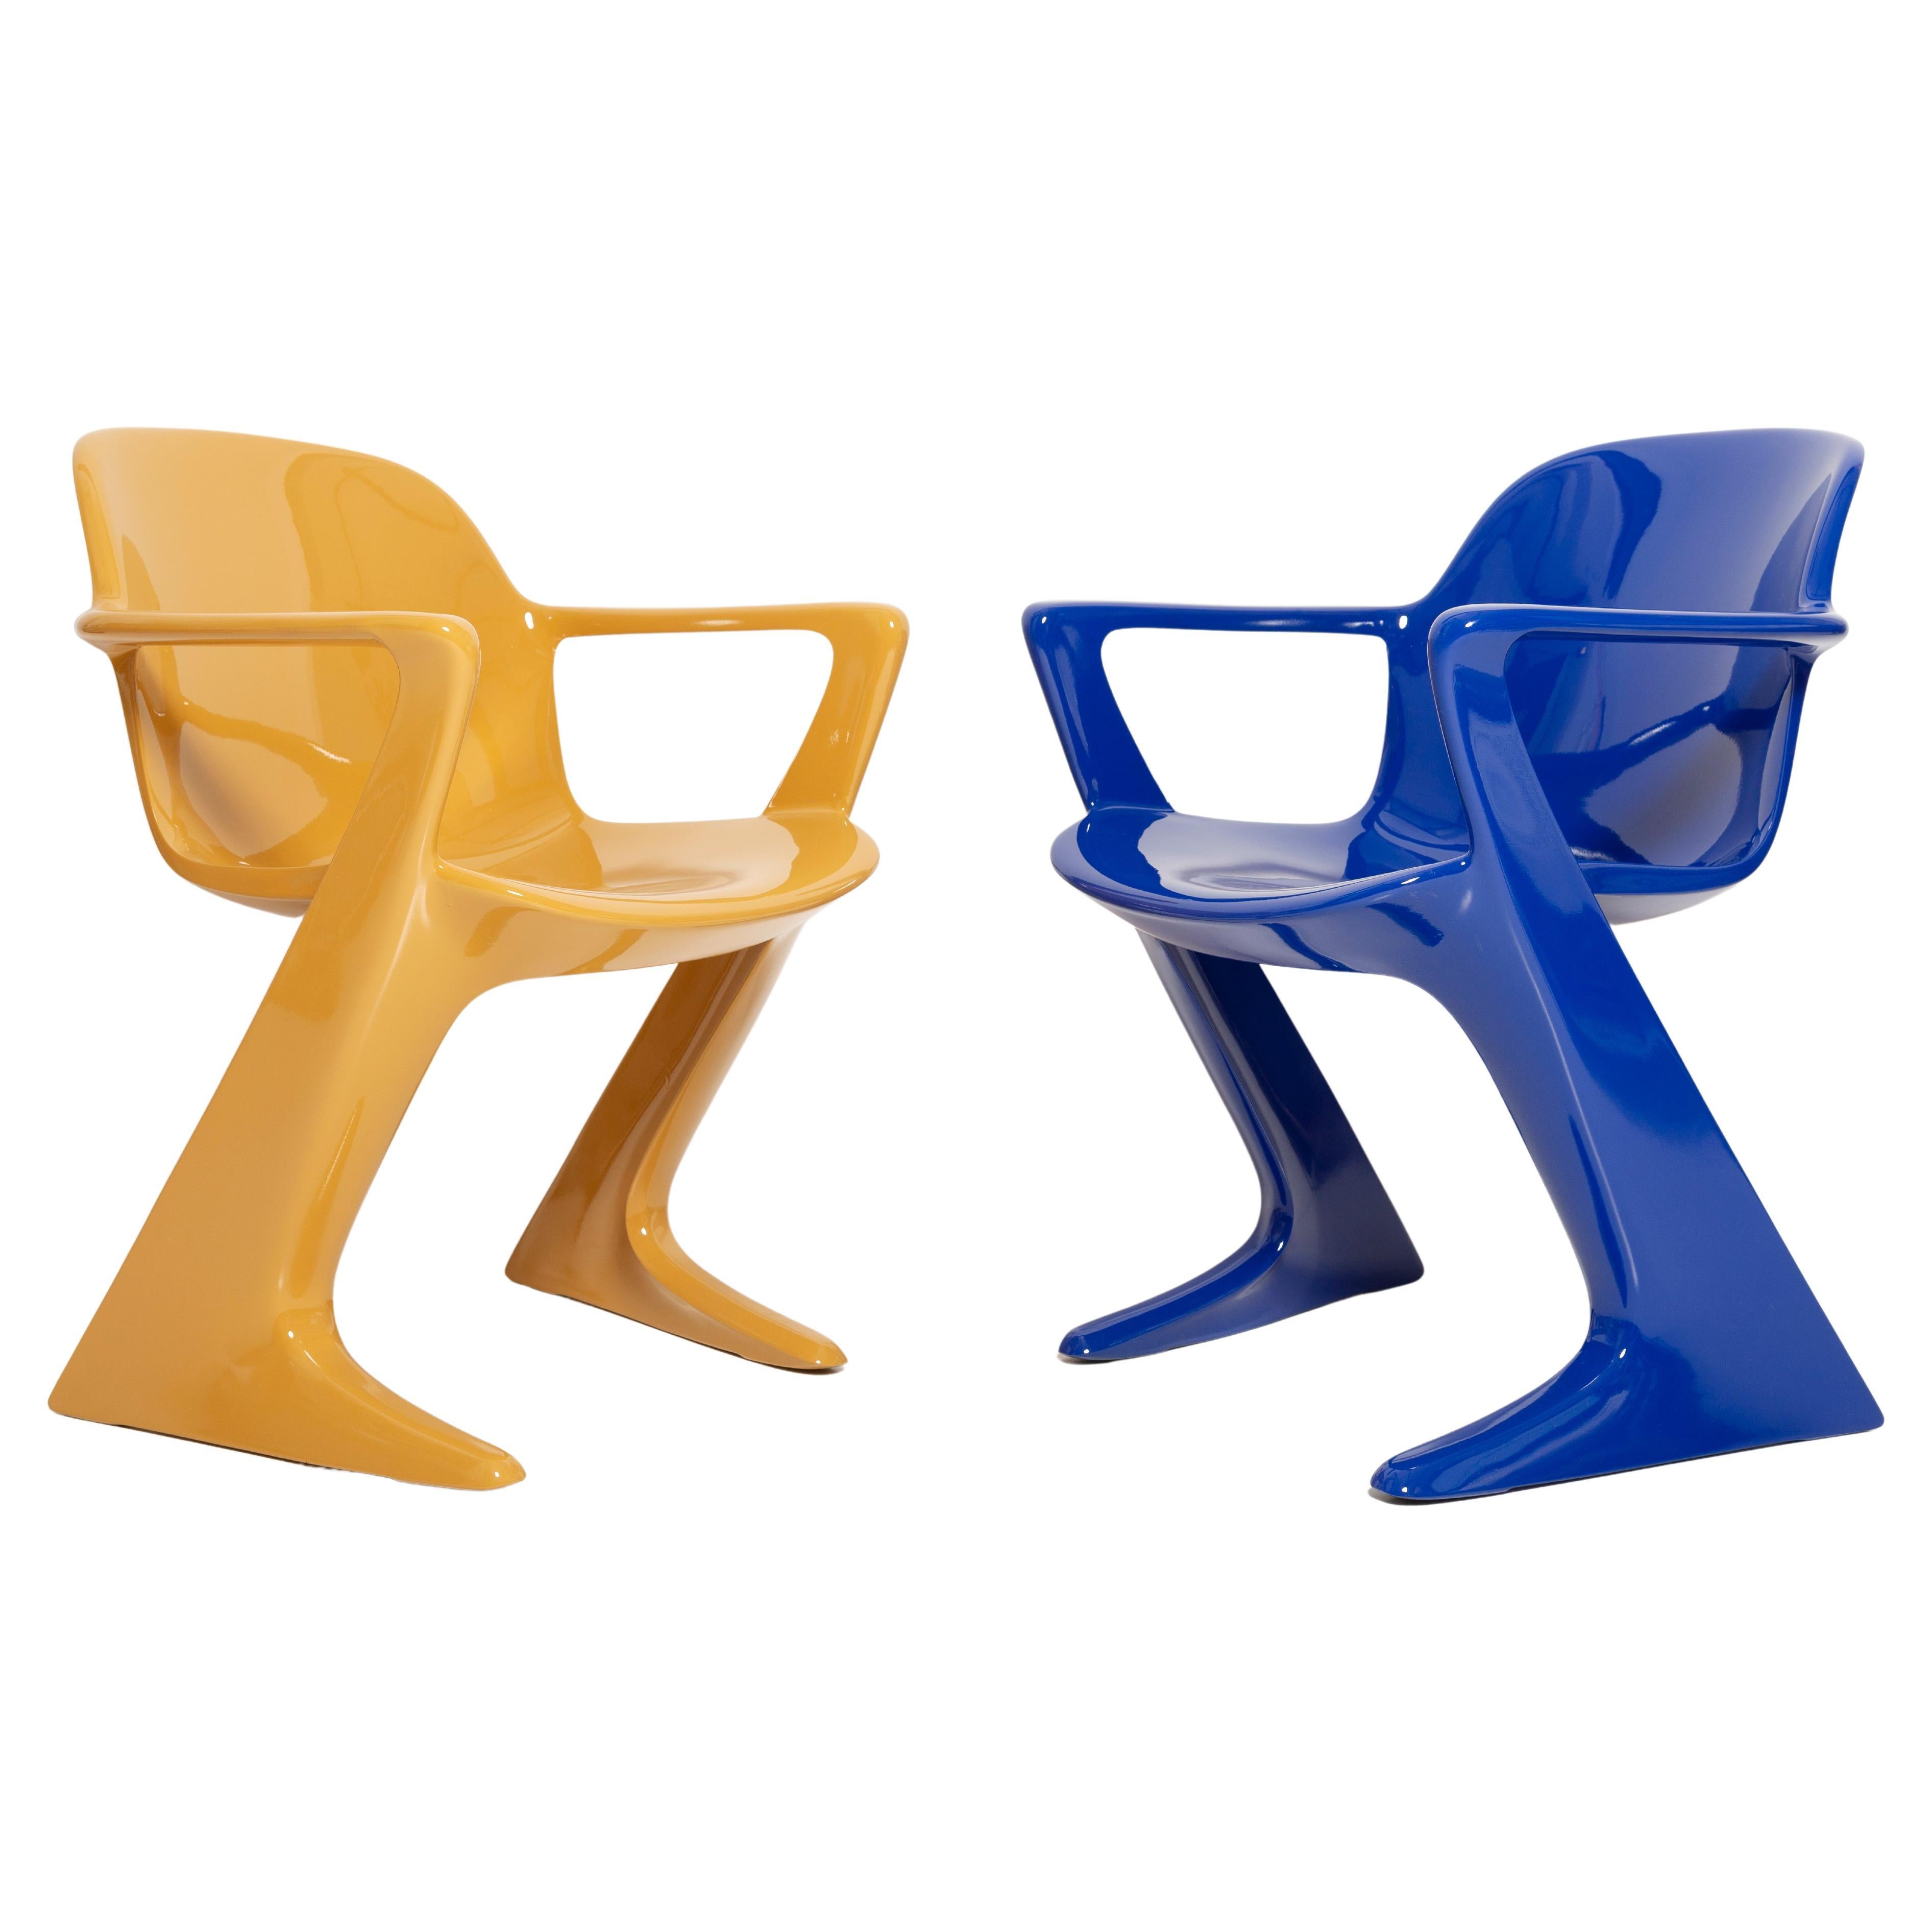 Two Mid-Century Mustard and Blue Kangaroo Chairs Ernst Moeckl, Germany, 1968 For Sale